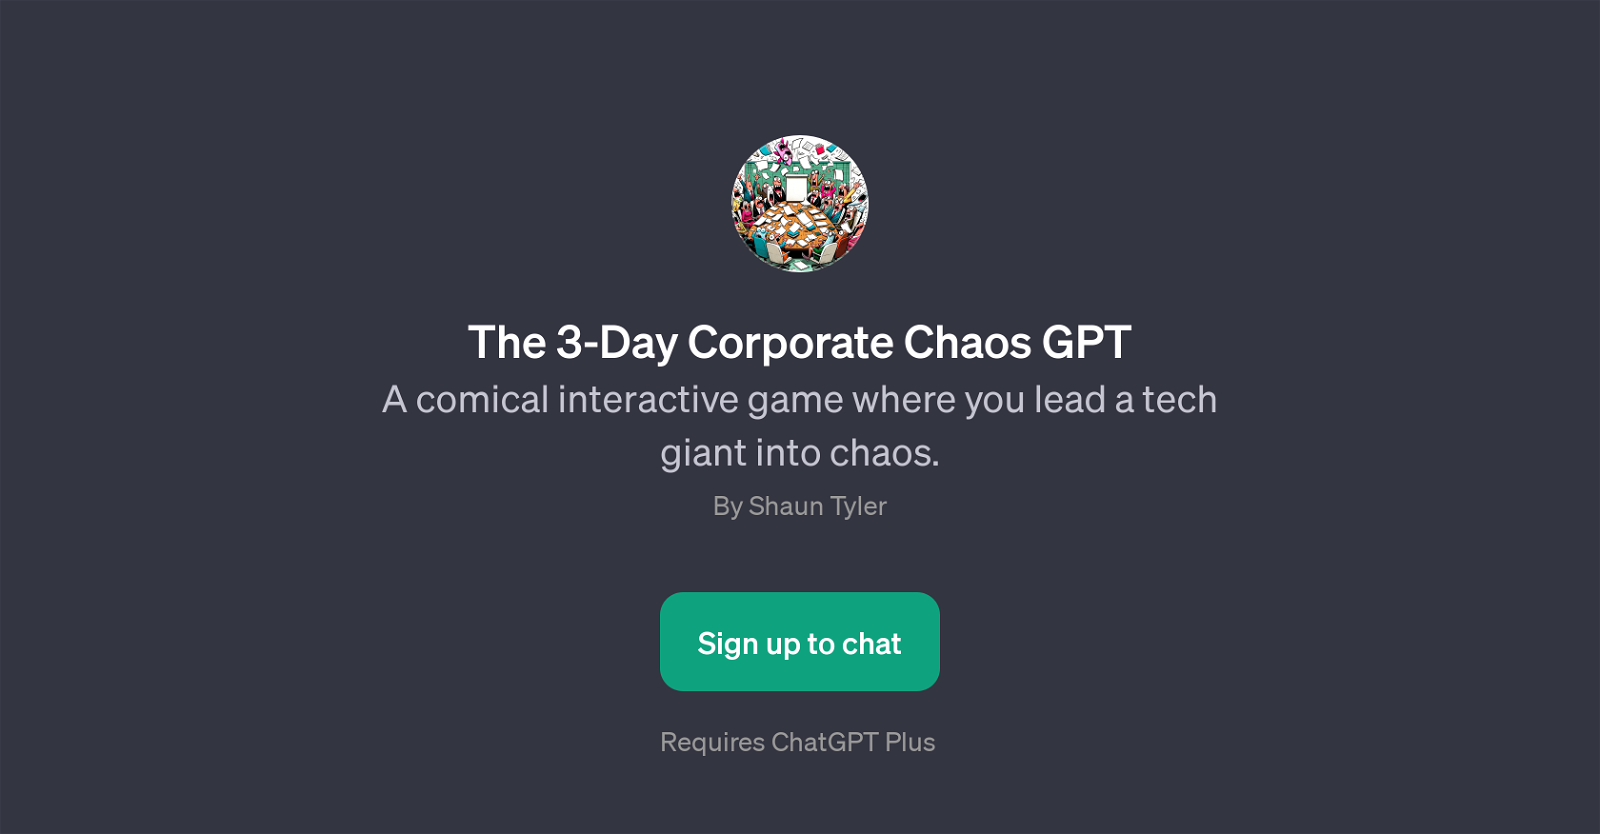 The 3-Day Corporate Chaos GPT website